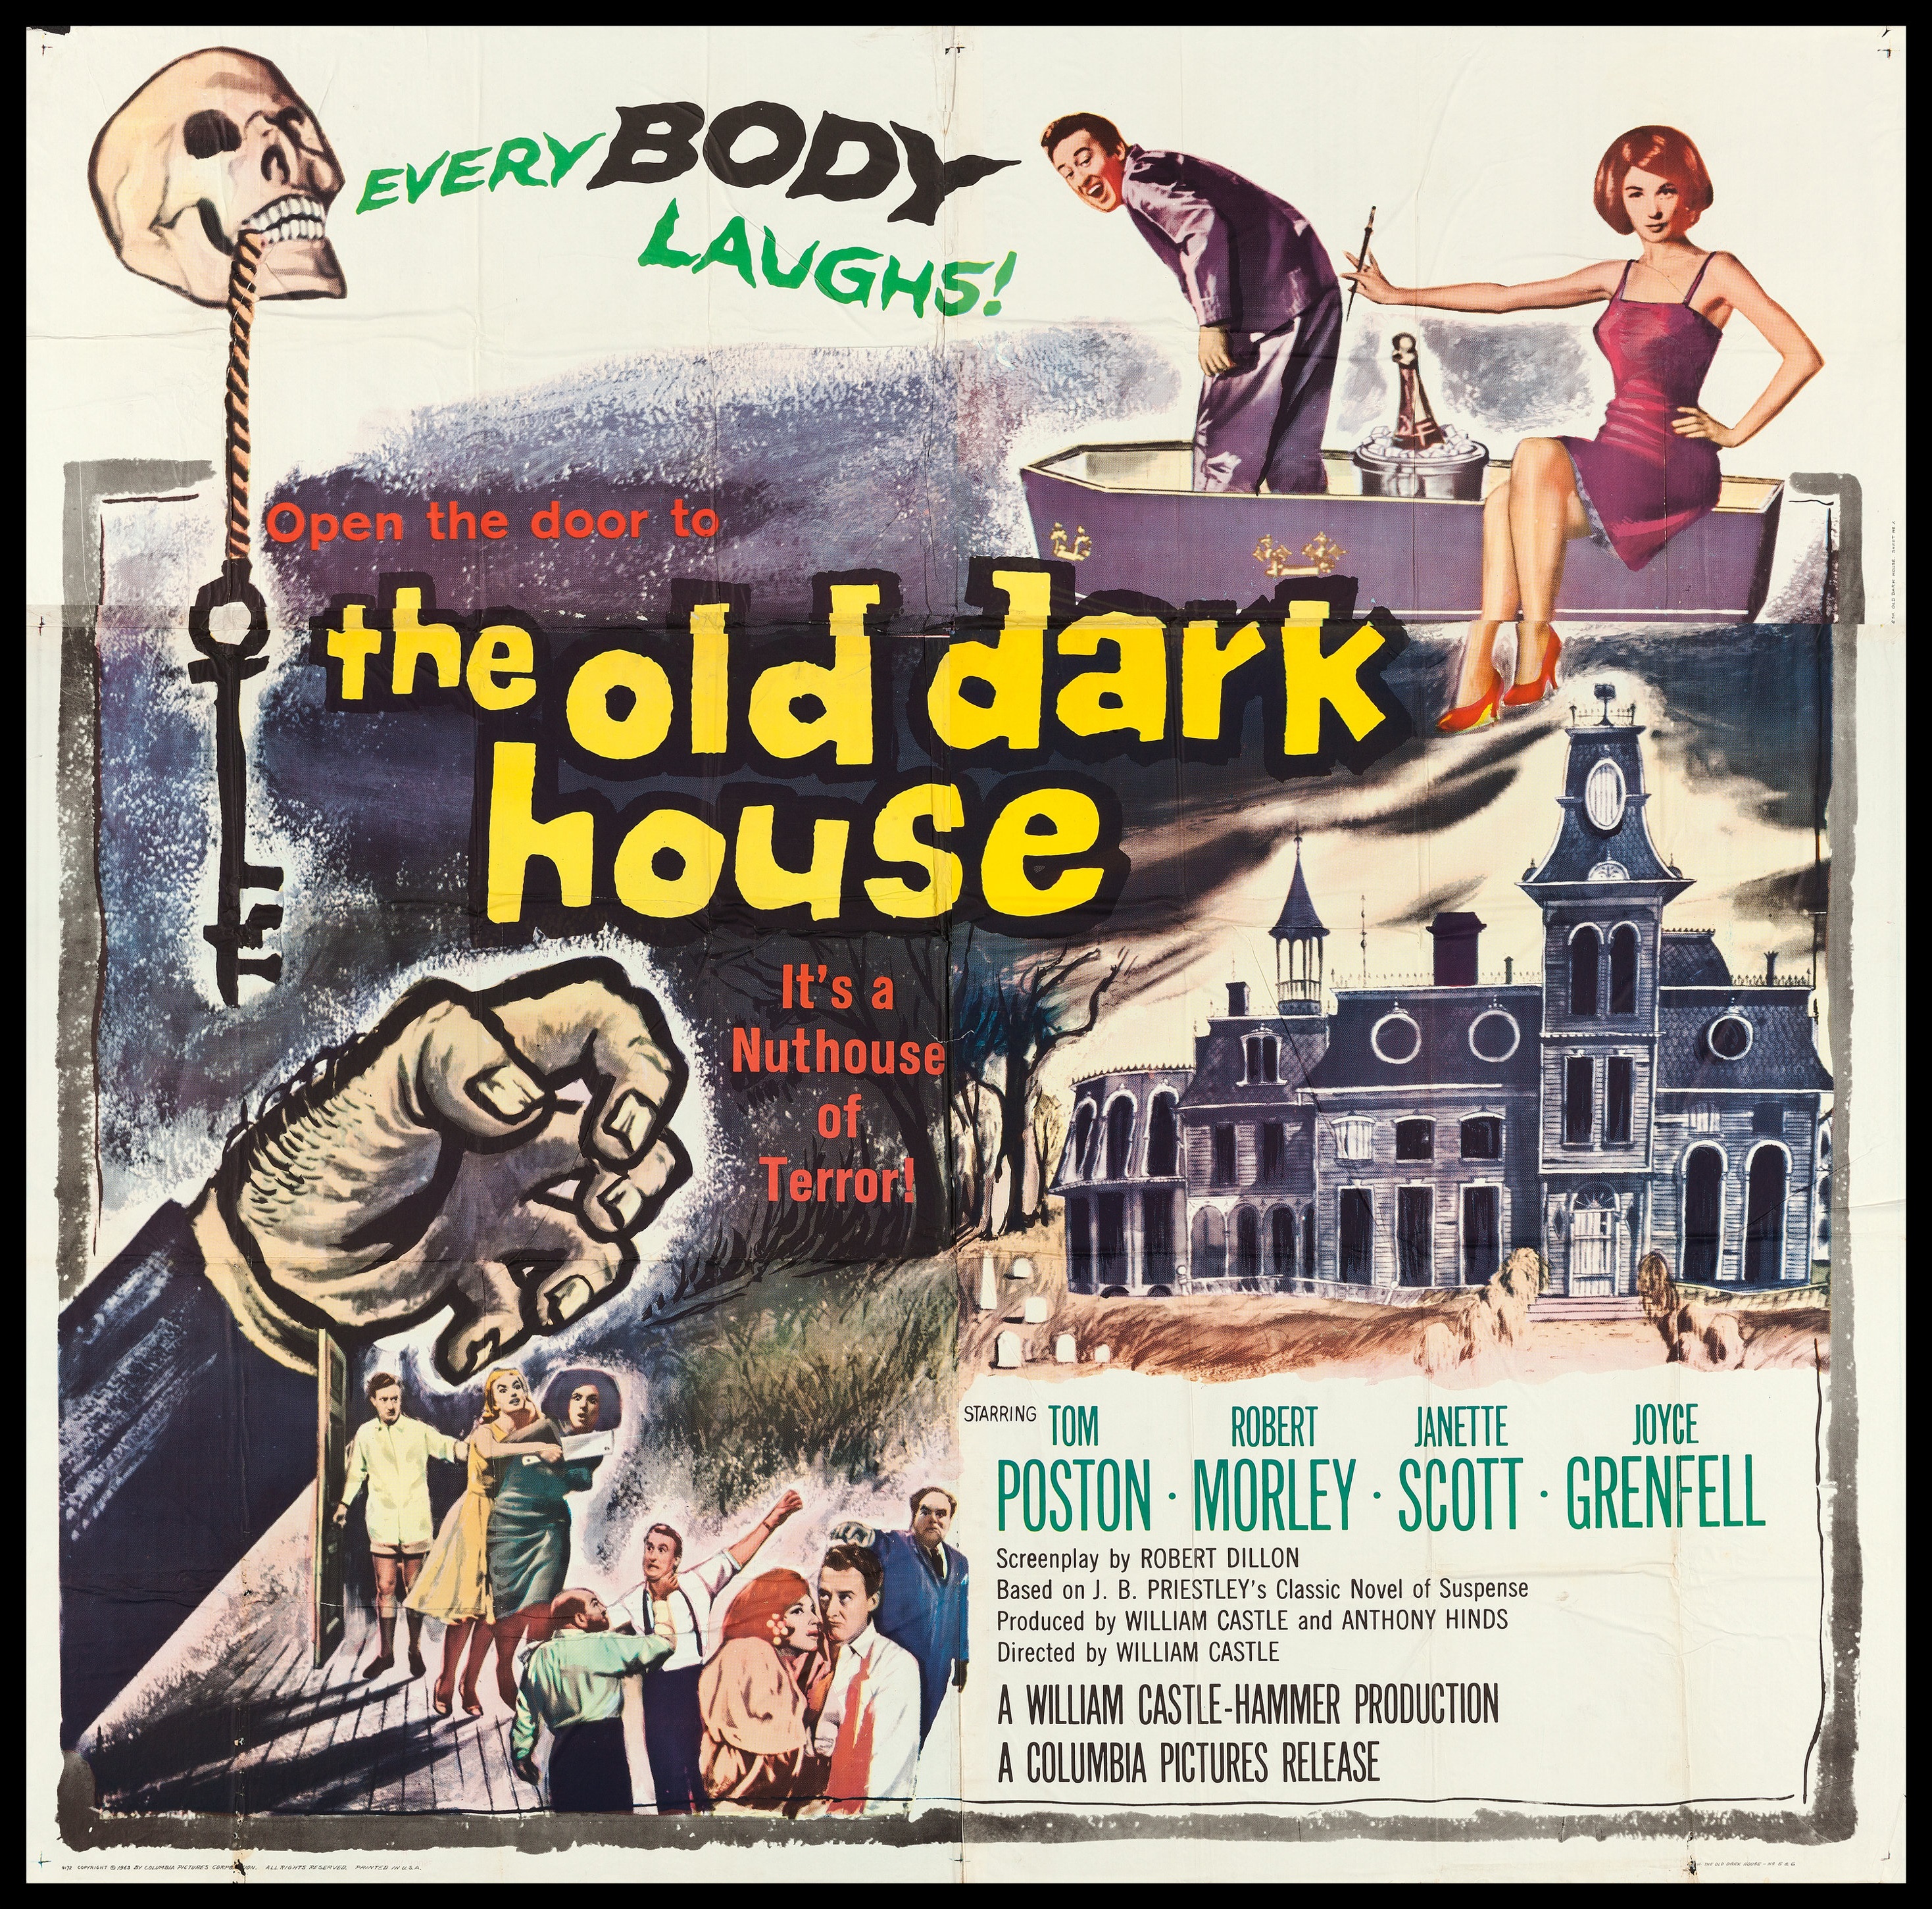 The Old Dark House (dir. William Castle, 1963) US 6 sheet poster